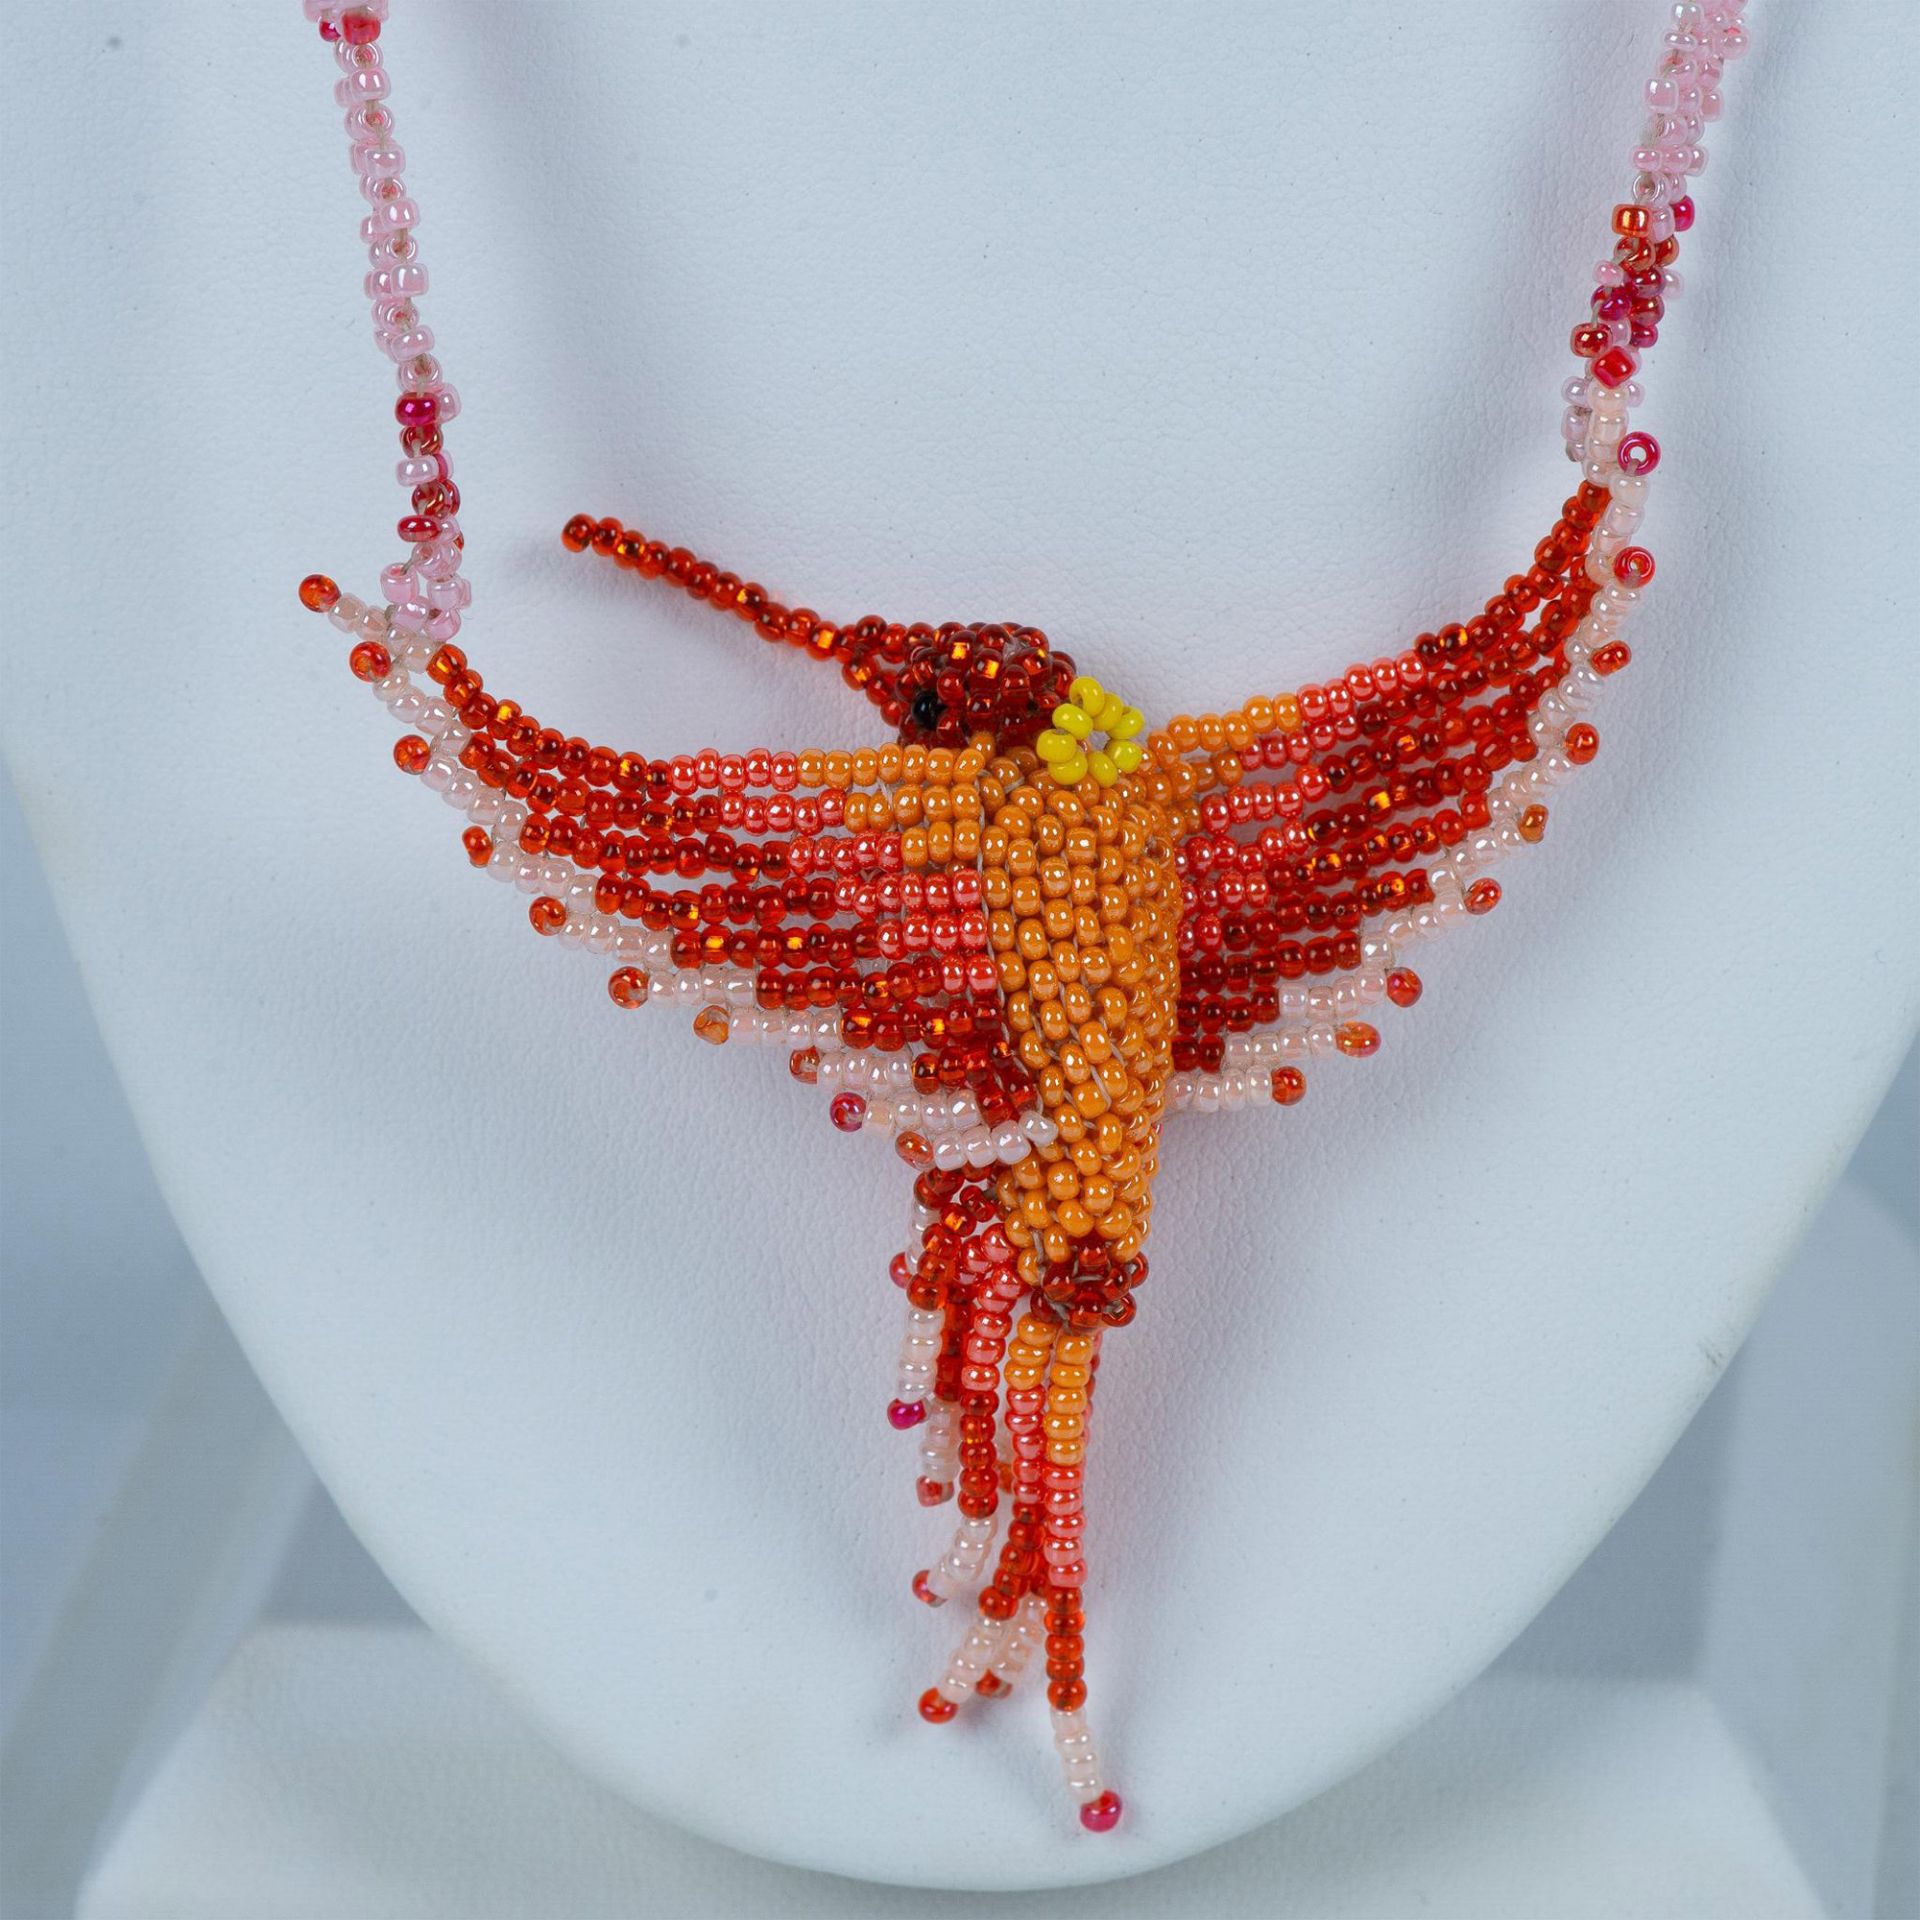 Native American Hand-Woven Beaded Hummingbird Necklace - Image 3 of 5